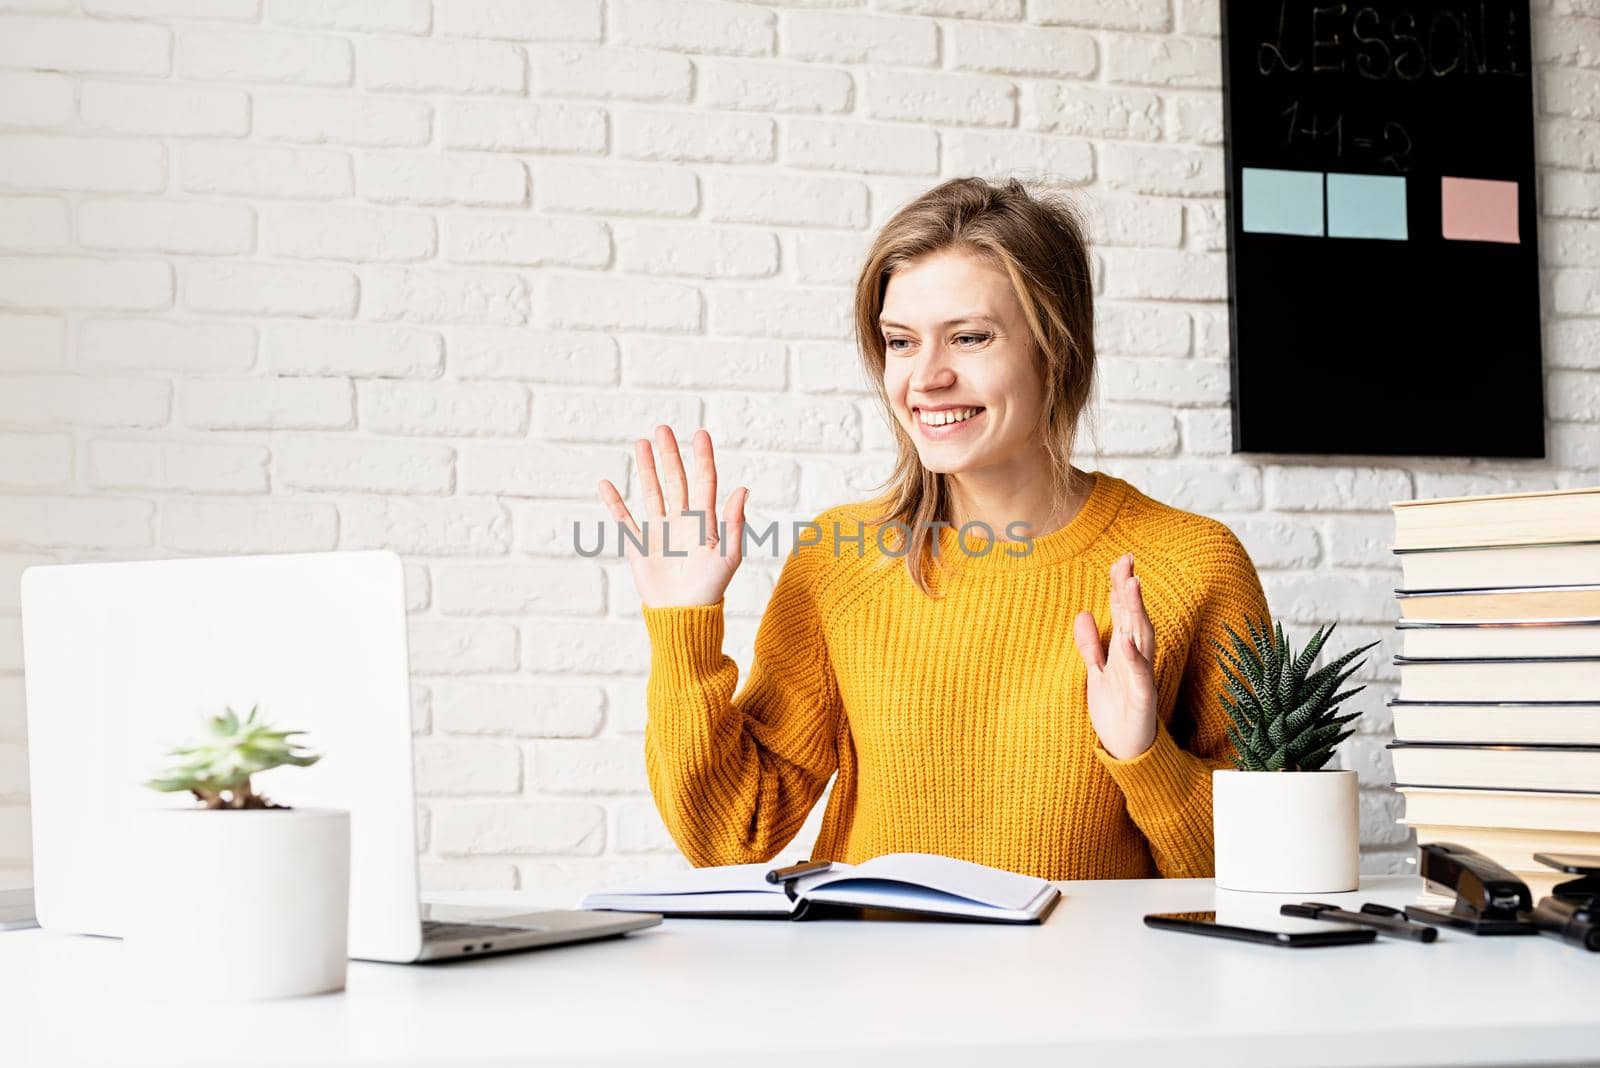 Distance learning. E-learning. Young smiling woman in yellow sweater studying online using laptop